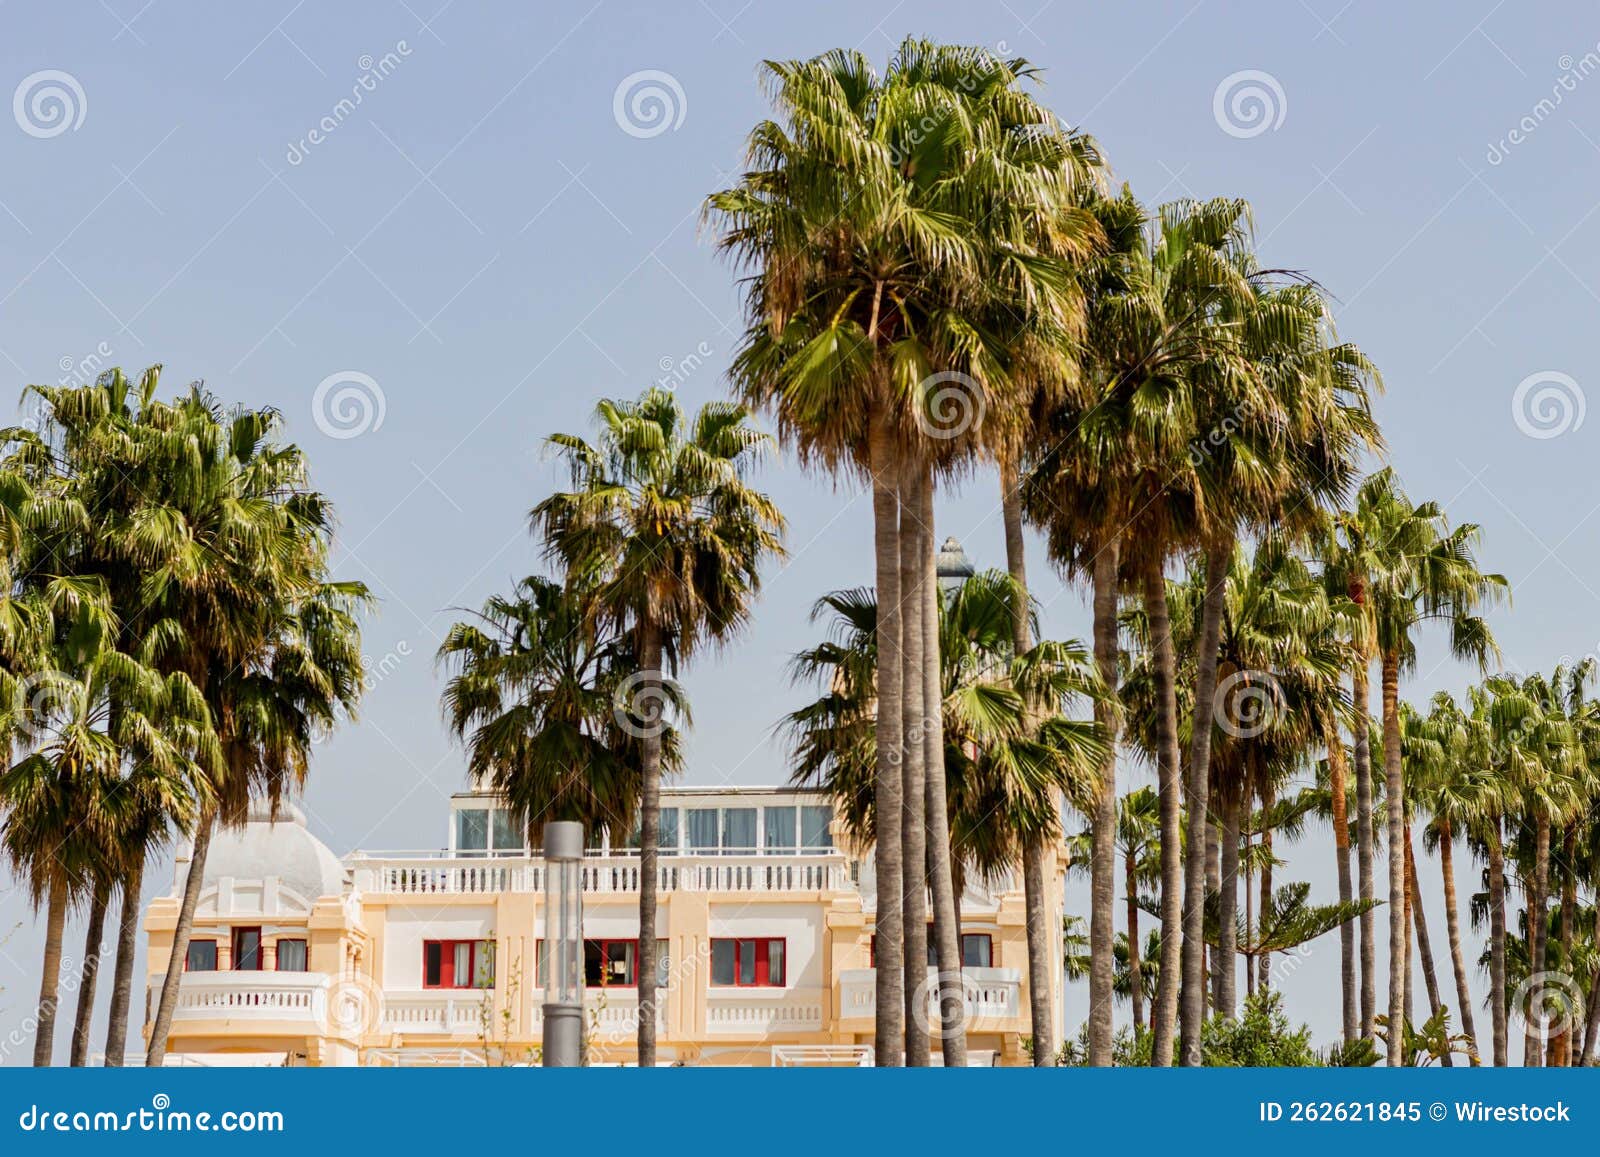 scenic shot of tall tropical palm trees in the background of ciutat jardi hotel